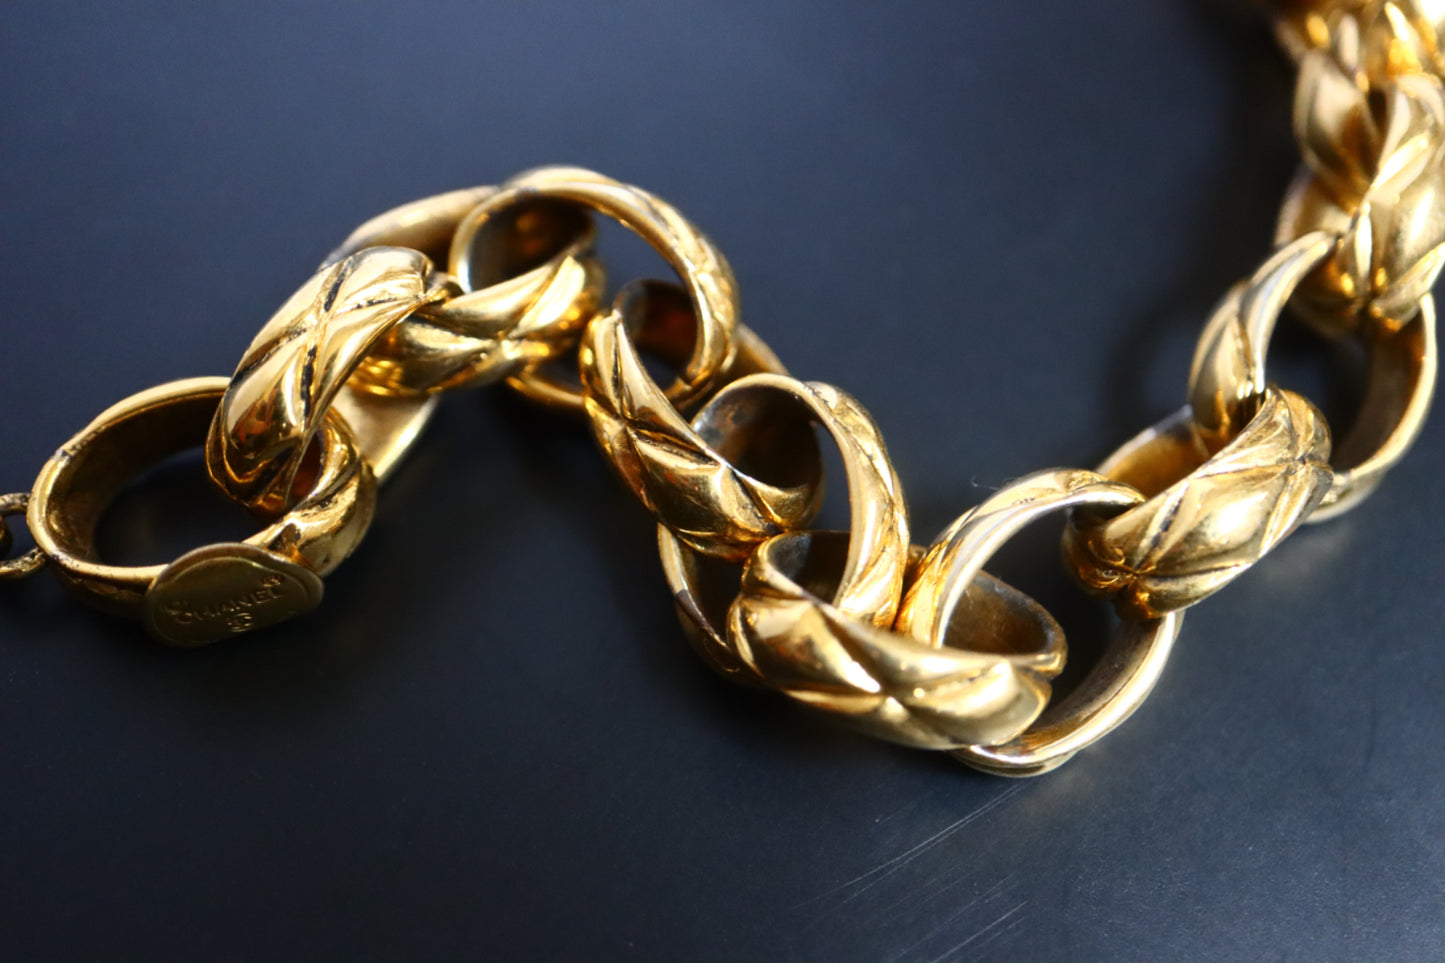 Vintage 1970s Chanel quilted gold tone chain bracelet